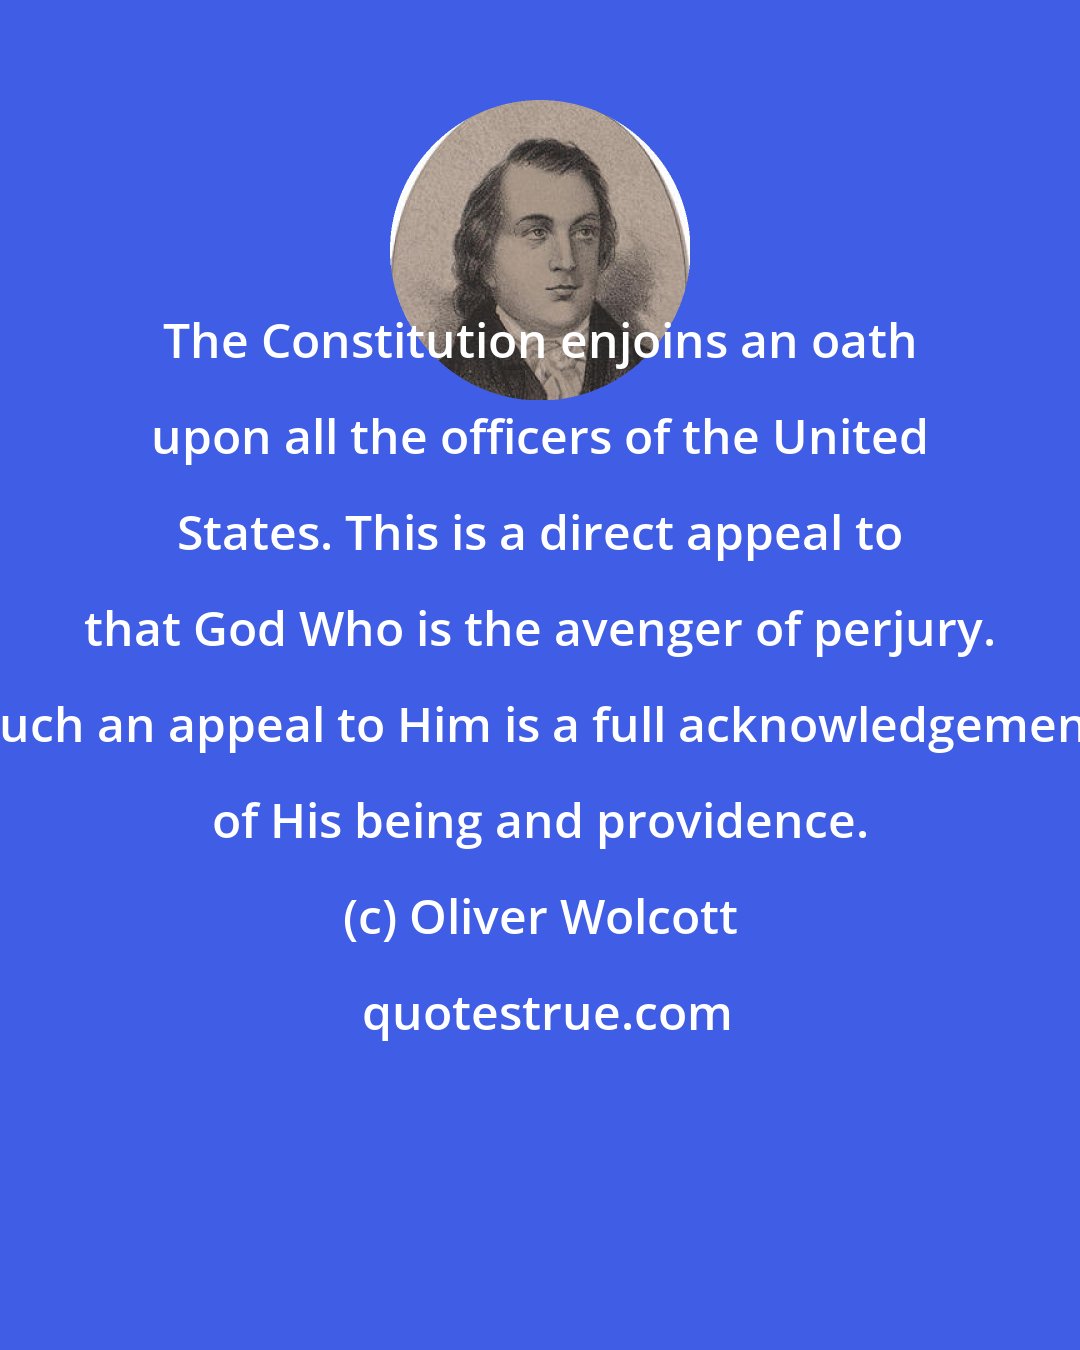 Oliver Wolcott: The Constitution enjoins an oath upon all the officers of the United States. This is a direct appeal to that God Who is the avenger of perjury. Such an appeal to Him is a full acknowledgement of His being and providence.